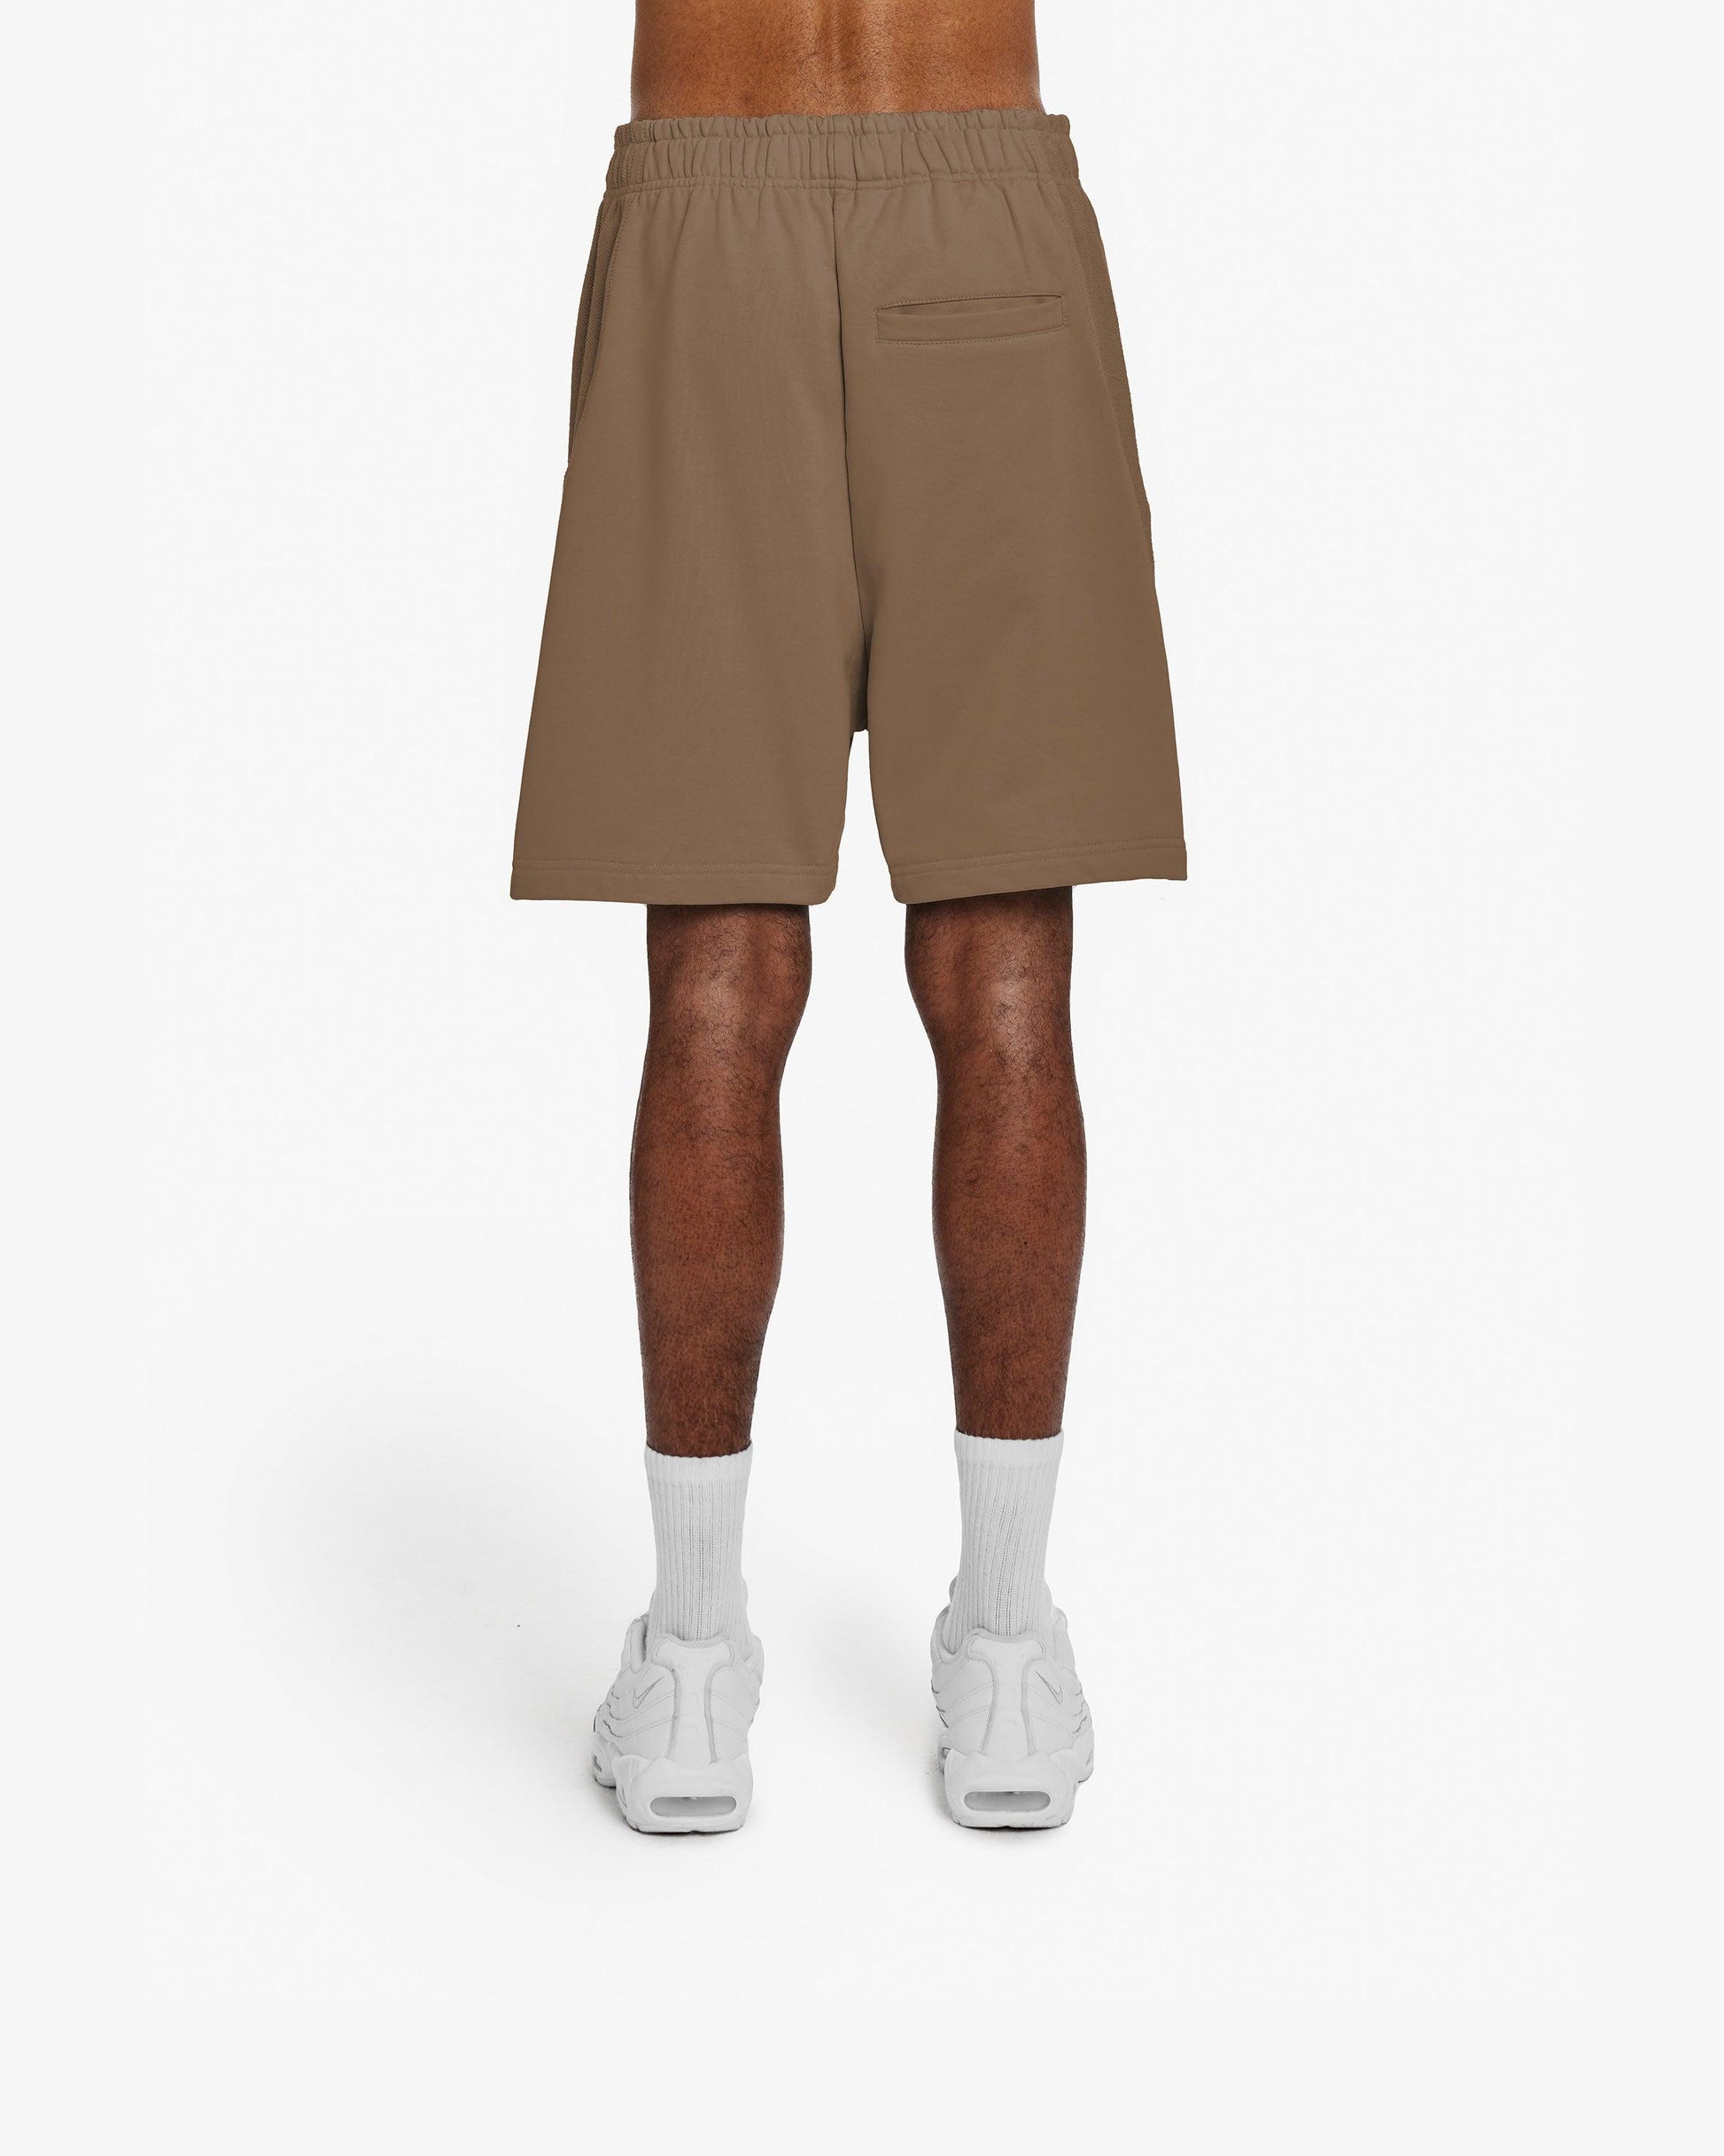 INSIDE OUT SHORTS CHOCOLATE BROWN - VICINITY